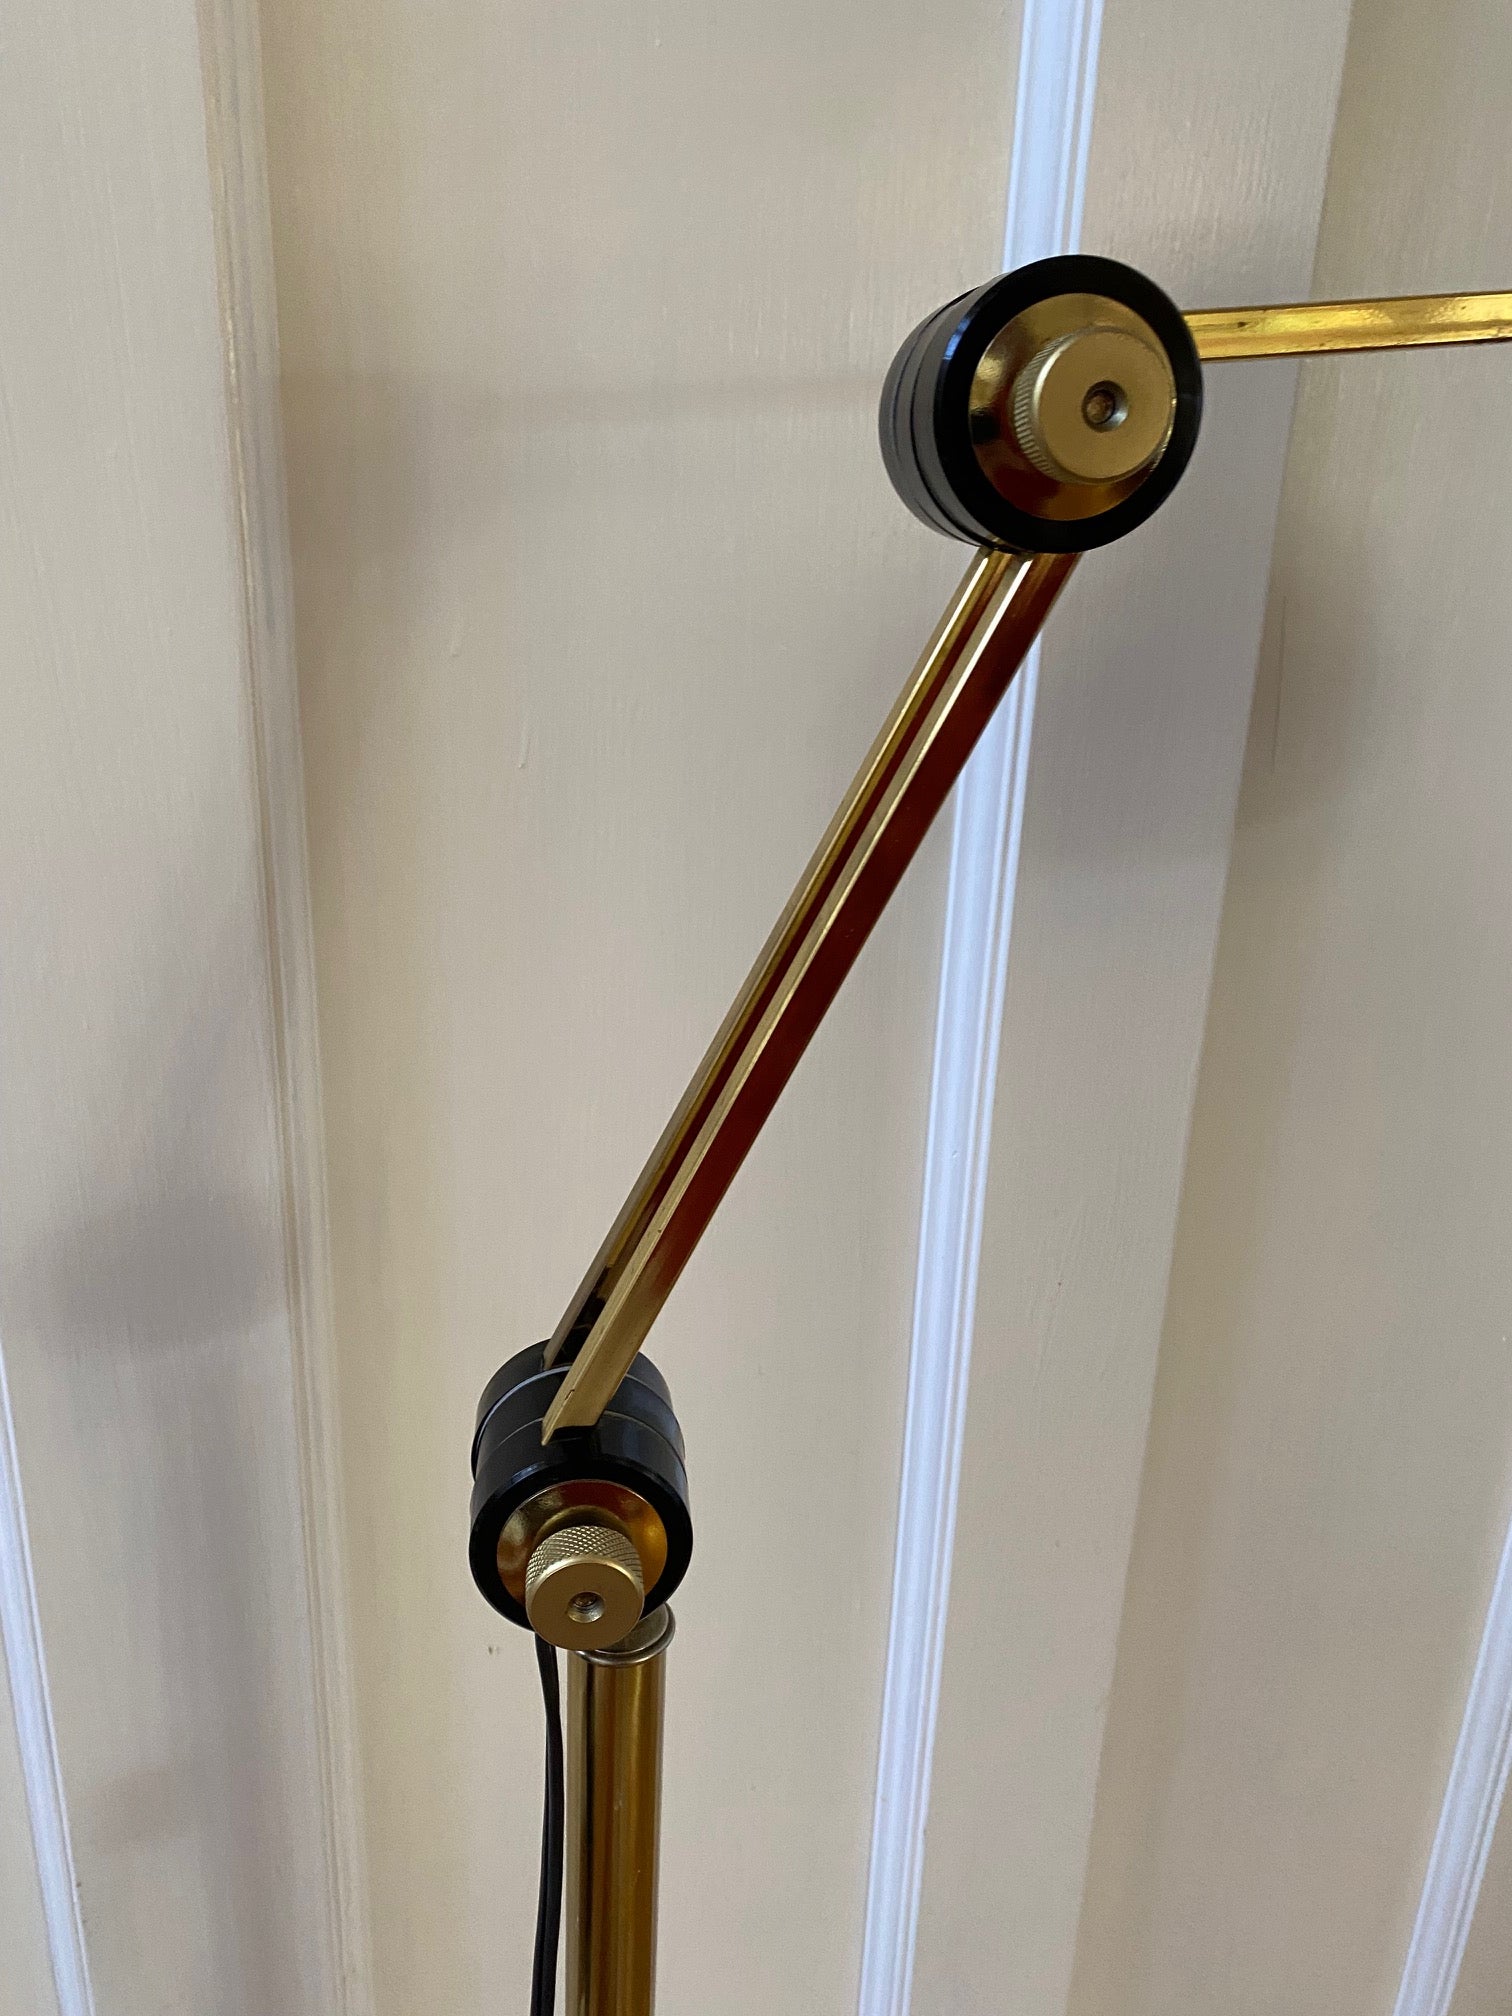 Adjustable knobs of Mid-century brass floor lamp. Retro black knobs at mid-pole adjust height and direction of the lamp. Made by Ward.- Cook Street Vintage